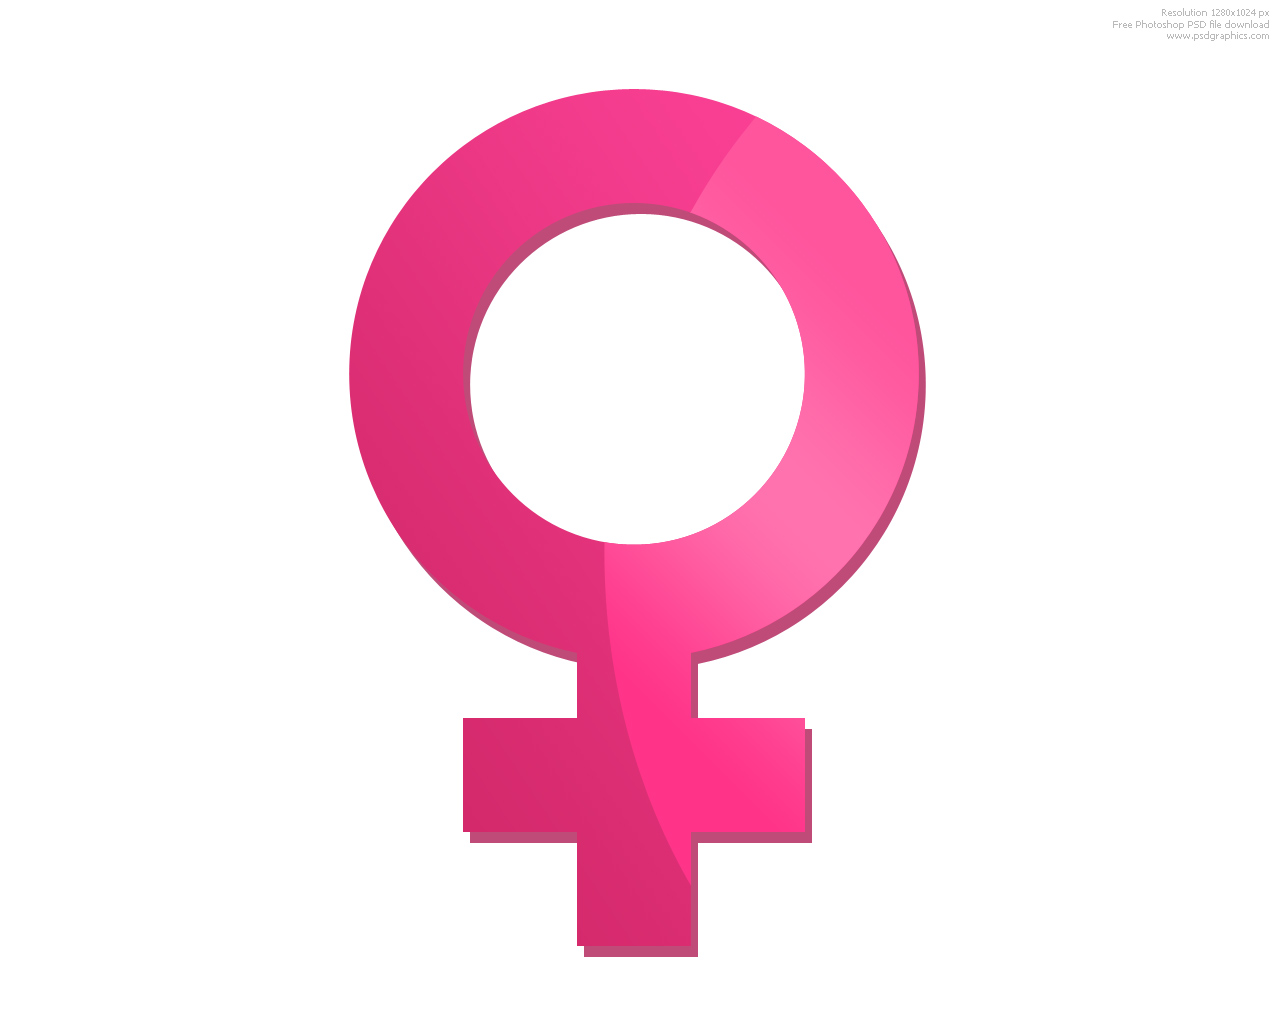 13 Male Female Symbols Images   Free Cliparts That You Can Download To    